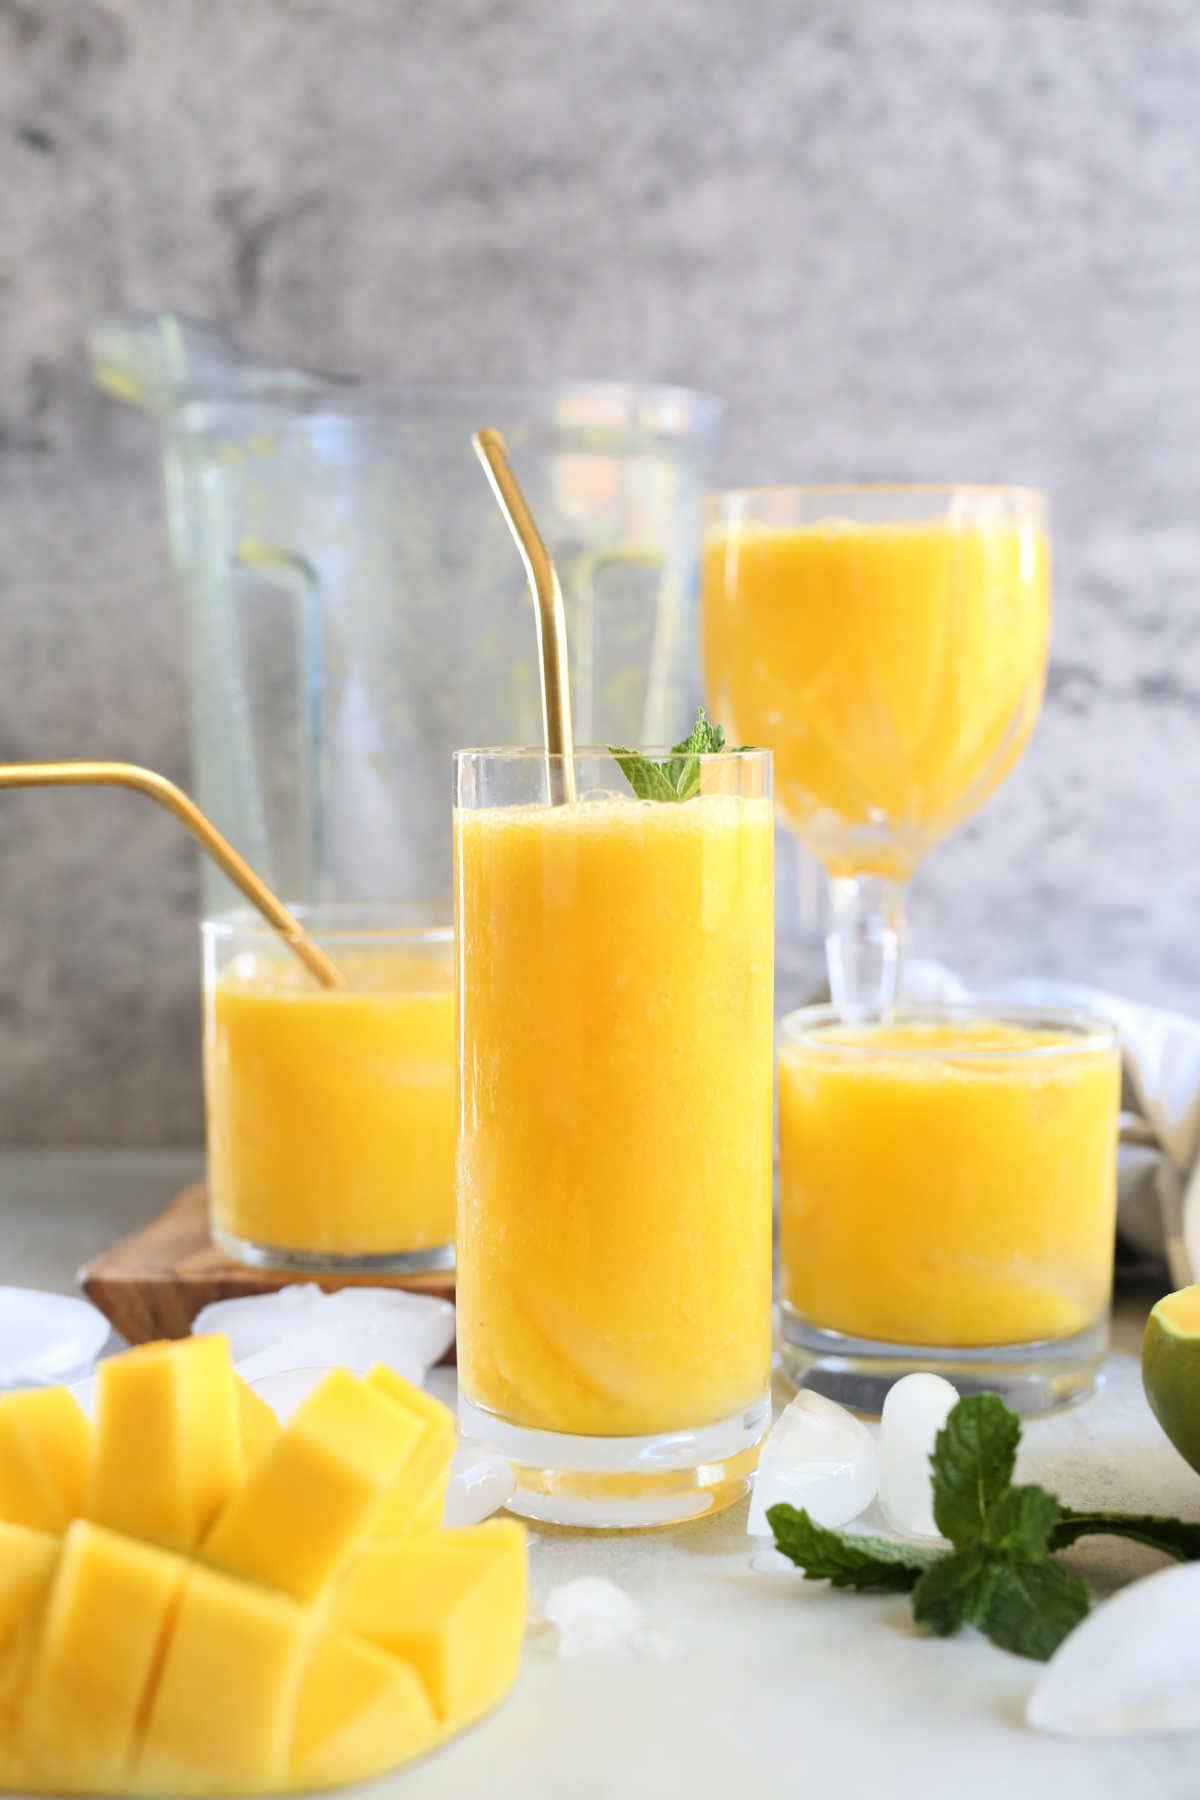 fresh tropical fruit juice in a glass